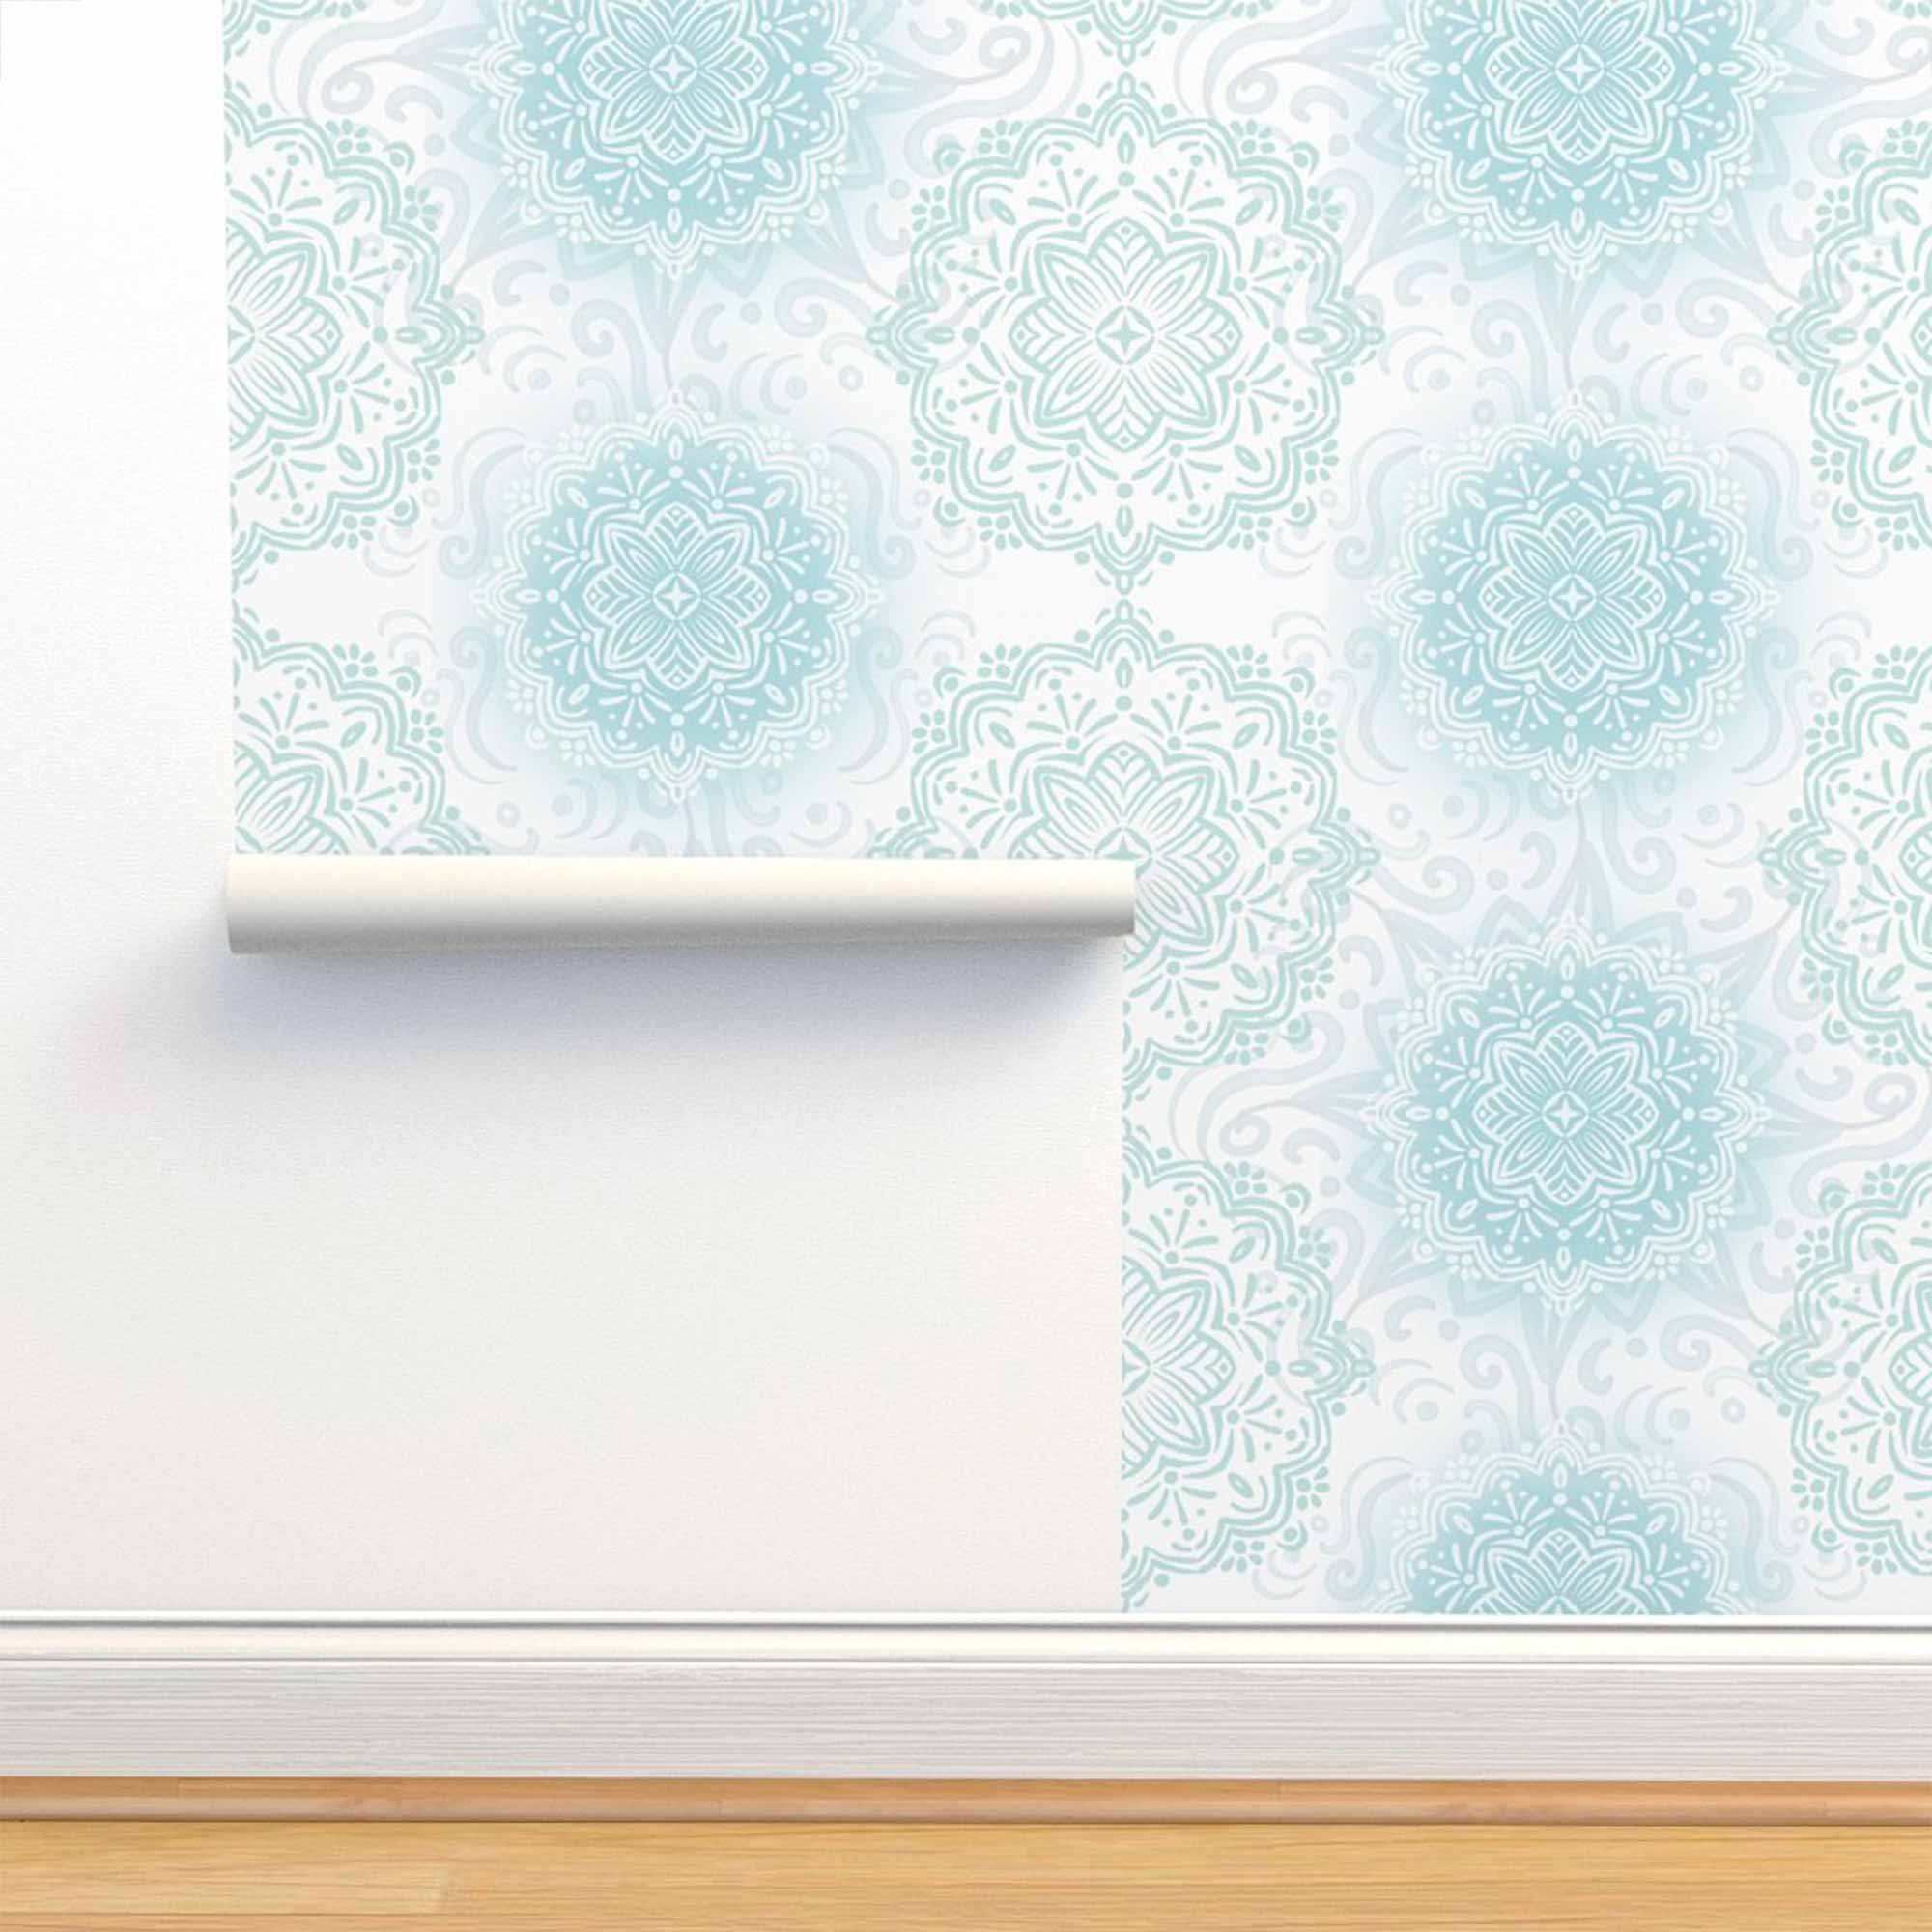 Boho Hand-drawn Mandalas in pastel Blue and Aqua Removable Peel & Stick and Pre-Pasted Wallpaper Roll Size Example